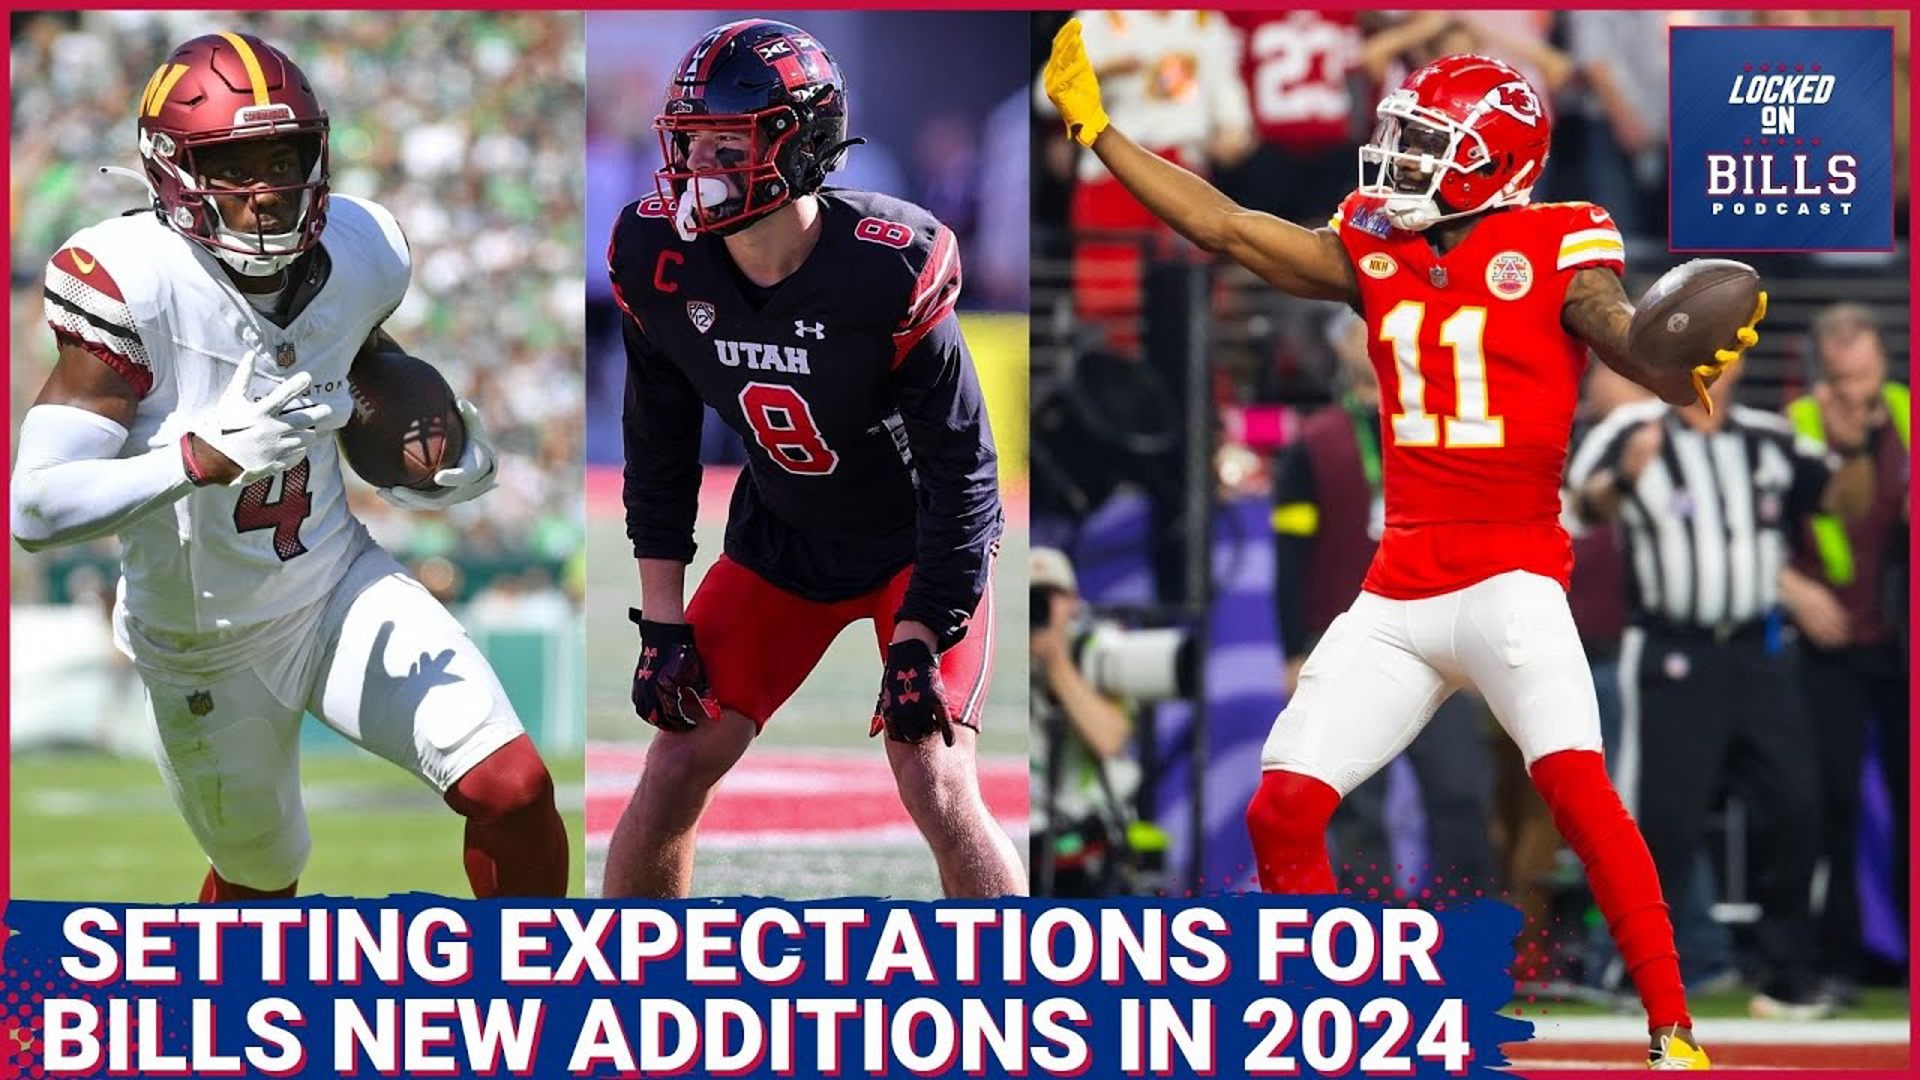 Expectations for Buffalo Bills offseason additions. Keon Coleman, Cole Bishop, Curtis Samuel & more!